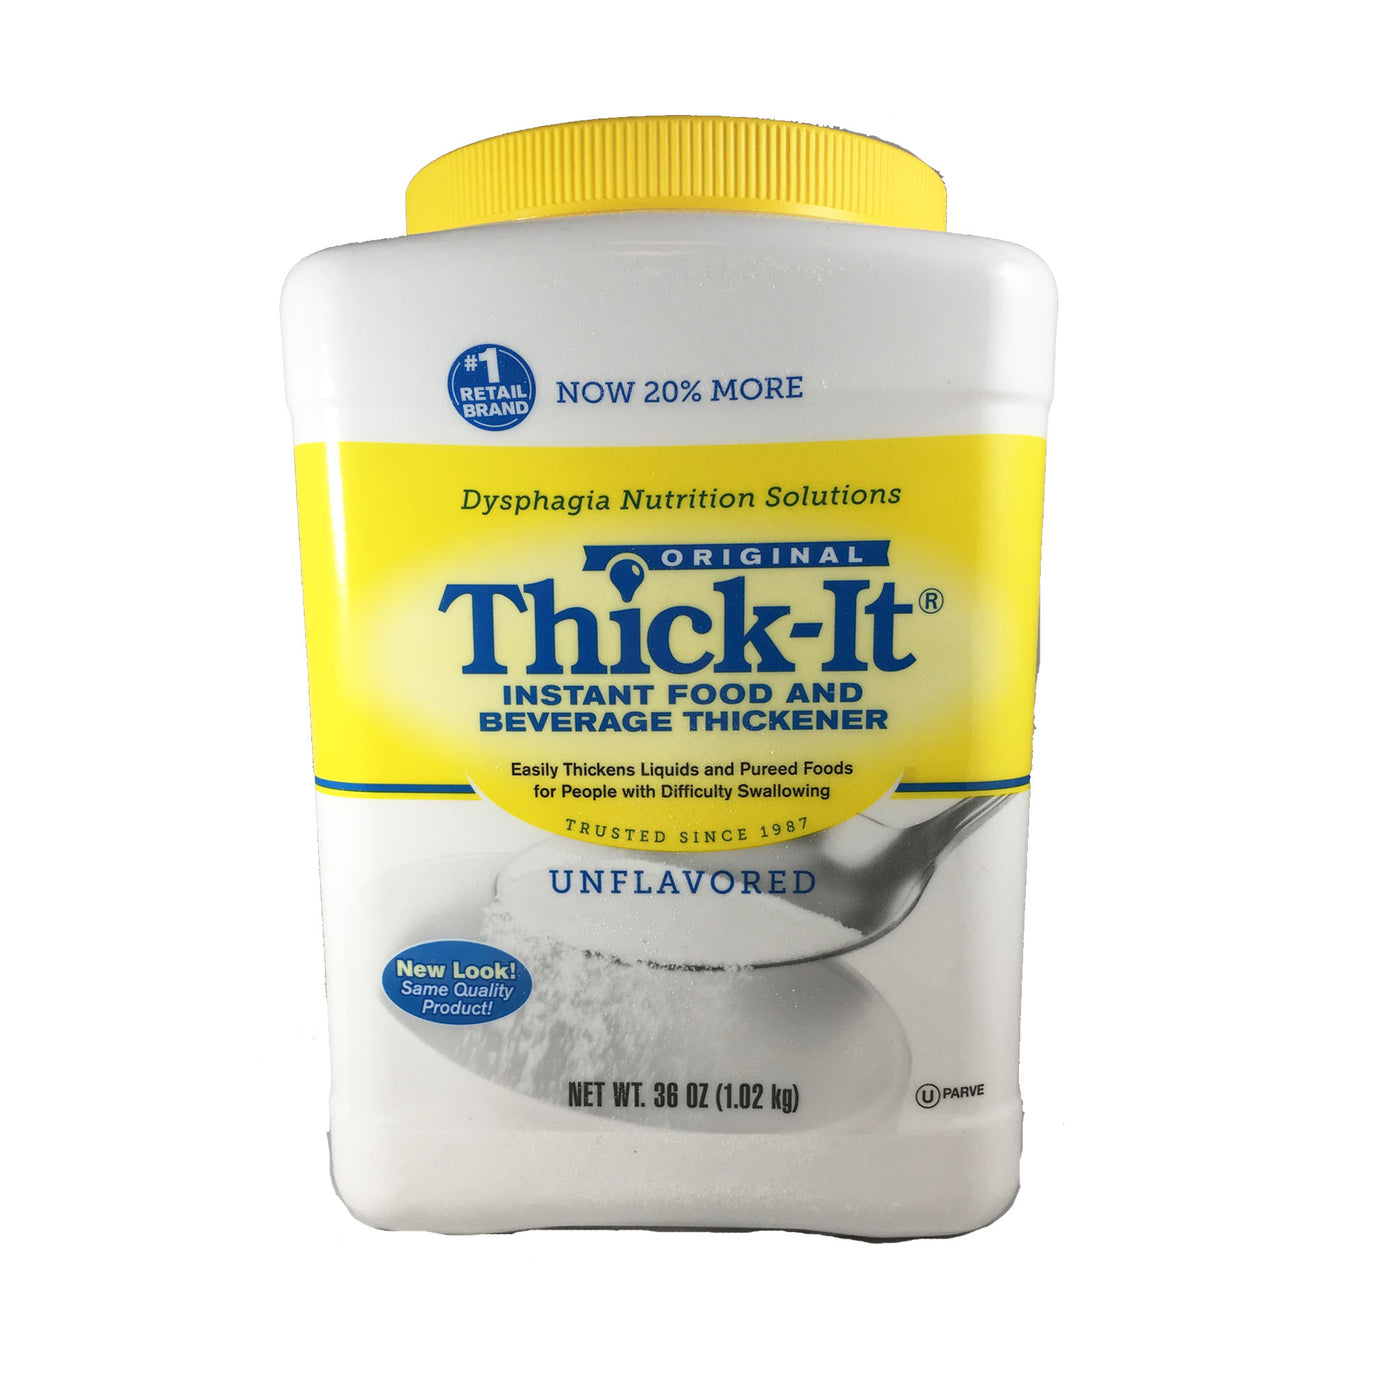 Original Thick-It Thickener at Meridian Medical Supply 915-351-2525